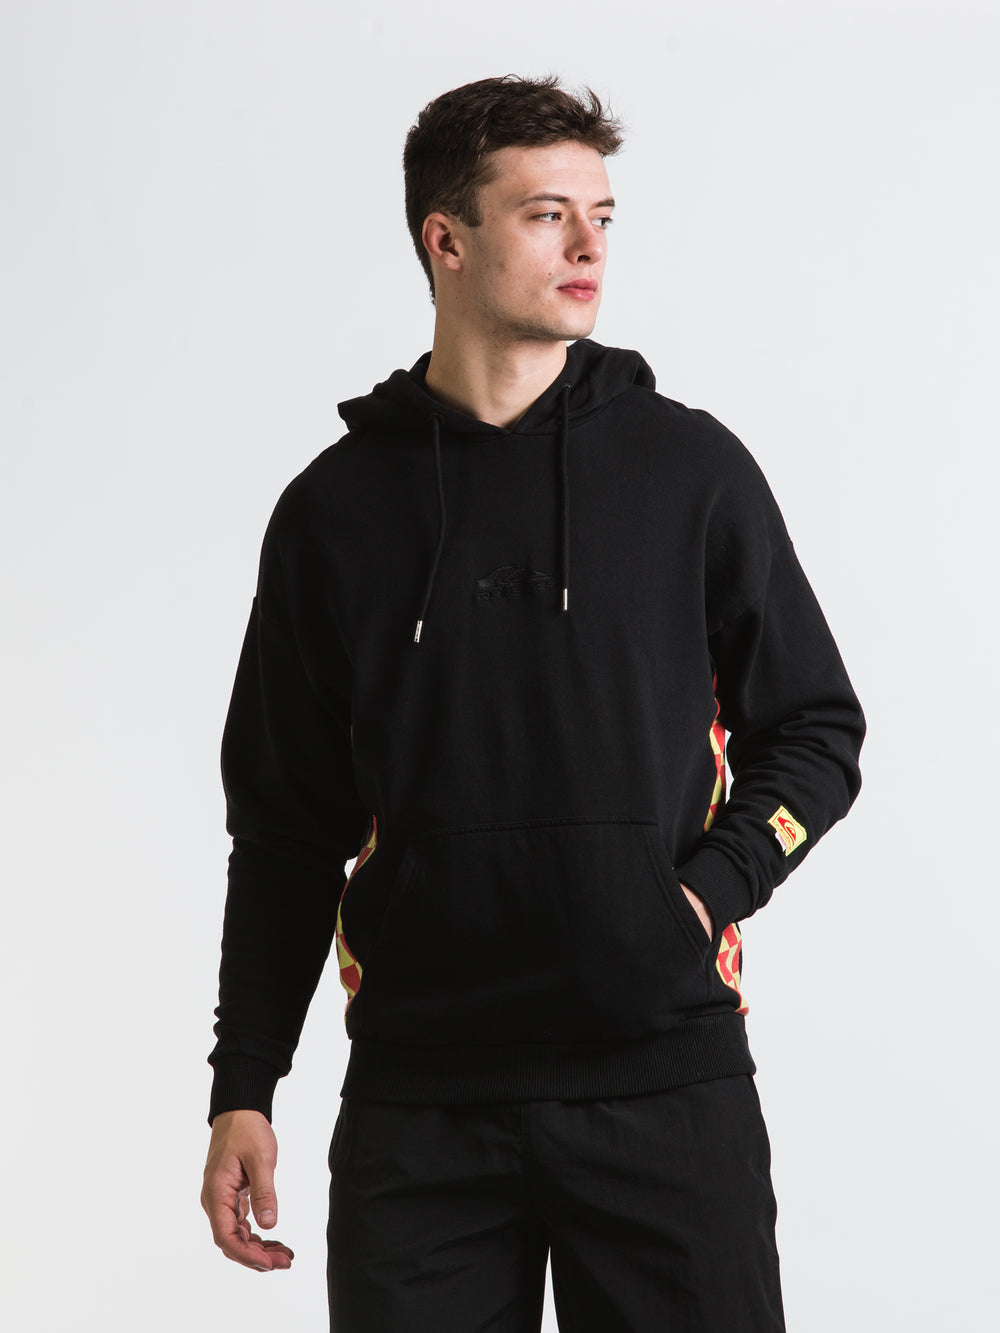 QUIKSILVER STRANGER THINGS SURFER BOY CHECKER HOODIE - CLEARANCE